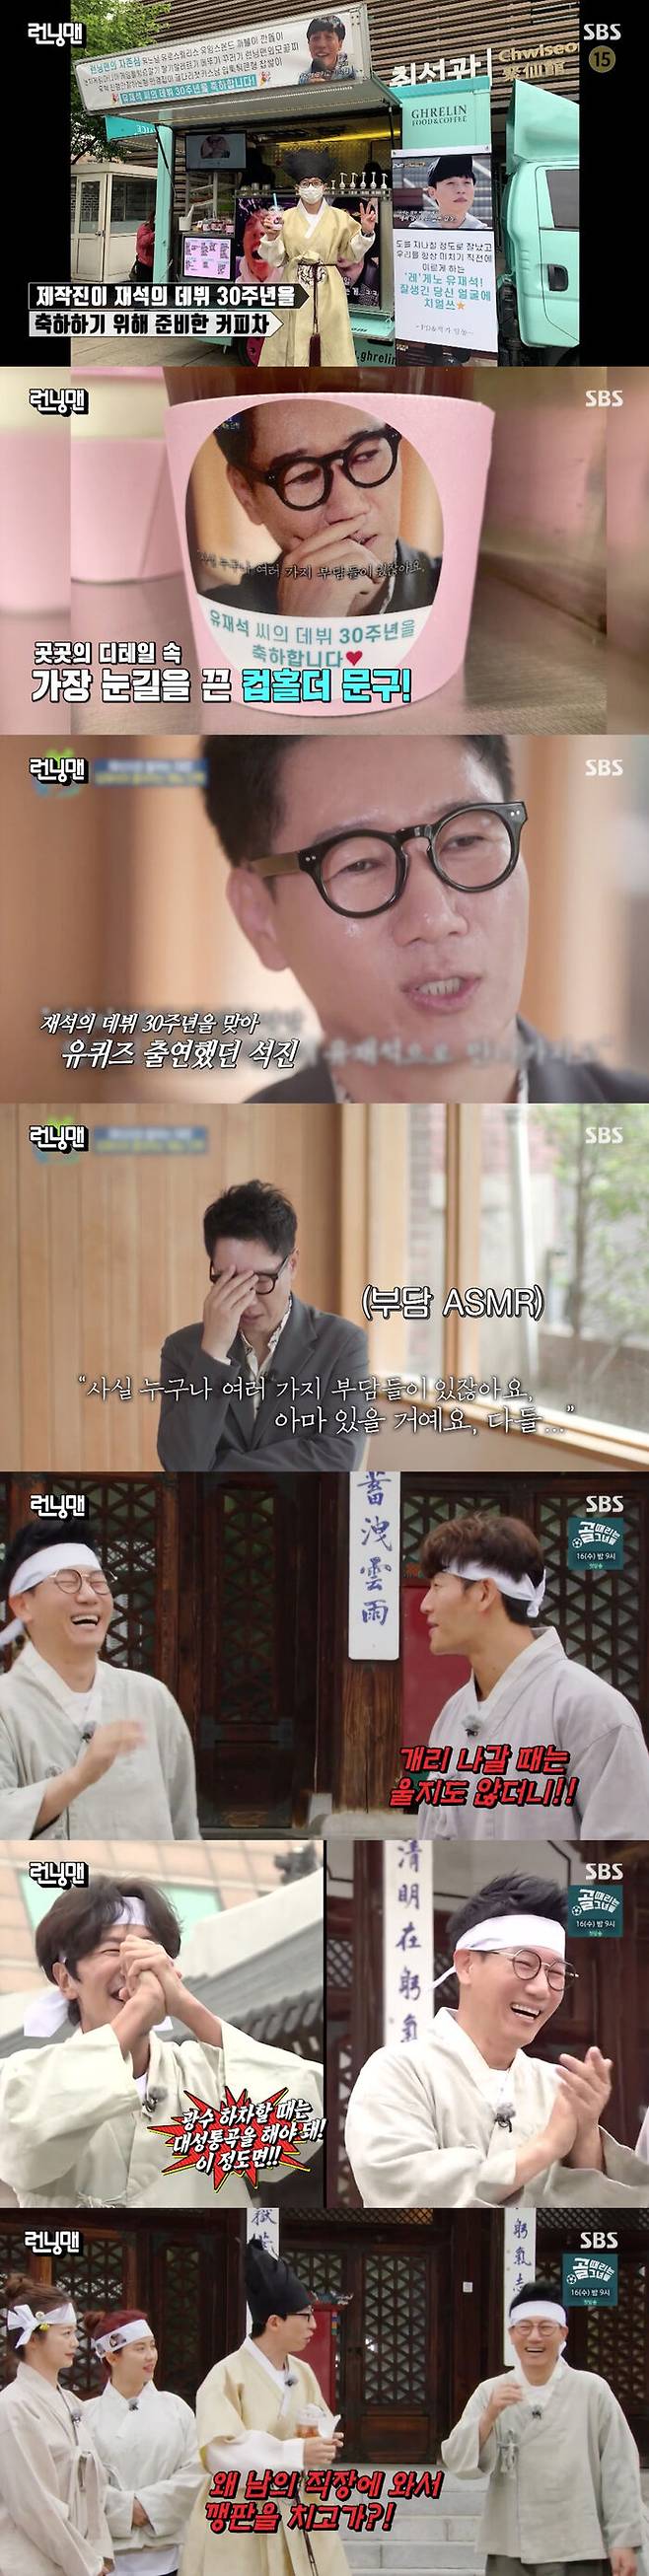 Ji Suk-jins wise saying drew laughter.On SBS Running Man broadcasted on the 6th, Park Jae-seok three-piece race was held.On the day of the broadcast, Haha said, In fact, everyone has a lot of burdens. The production team read the cup holder phrase of coffee tea prepared by Haha for the 30th anniversary of Yoo Jae-Suks debut.This was the comment of Ji Suk-jin, who appeared in You Quiz on the Block, Haha, the 30th anniversary of Yoo Jae-Suks debut.He suddenly tears at a request for a video letter to Yoo Jae-Suk and says, In fact, everyone has a lot of burdens, maybe there is. Everyone.The members were funny, teasing Ji Suk-jin. Kim Jong-guk said, I had a lot of sad things in Running Man.I have to do a big wail when I get off the mine. Then Ji Suk-jin explained, I do not prepare, I did not know.Soon after, a great Park Jae-Seok arose and a great Park Jae-Seok roared at Ji Suk-jin, who asked for a new scene.I cry, he told Ji Suk-jin not to cry.Yoo Jae-Suk then said, Why come to someones job and hit the board, why are you stabbing? Anger said, and Haha said, Dont do that.In fact, everyone has a lot of burdens, he laughed at him.